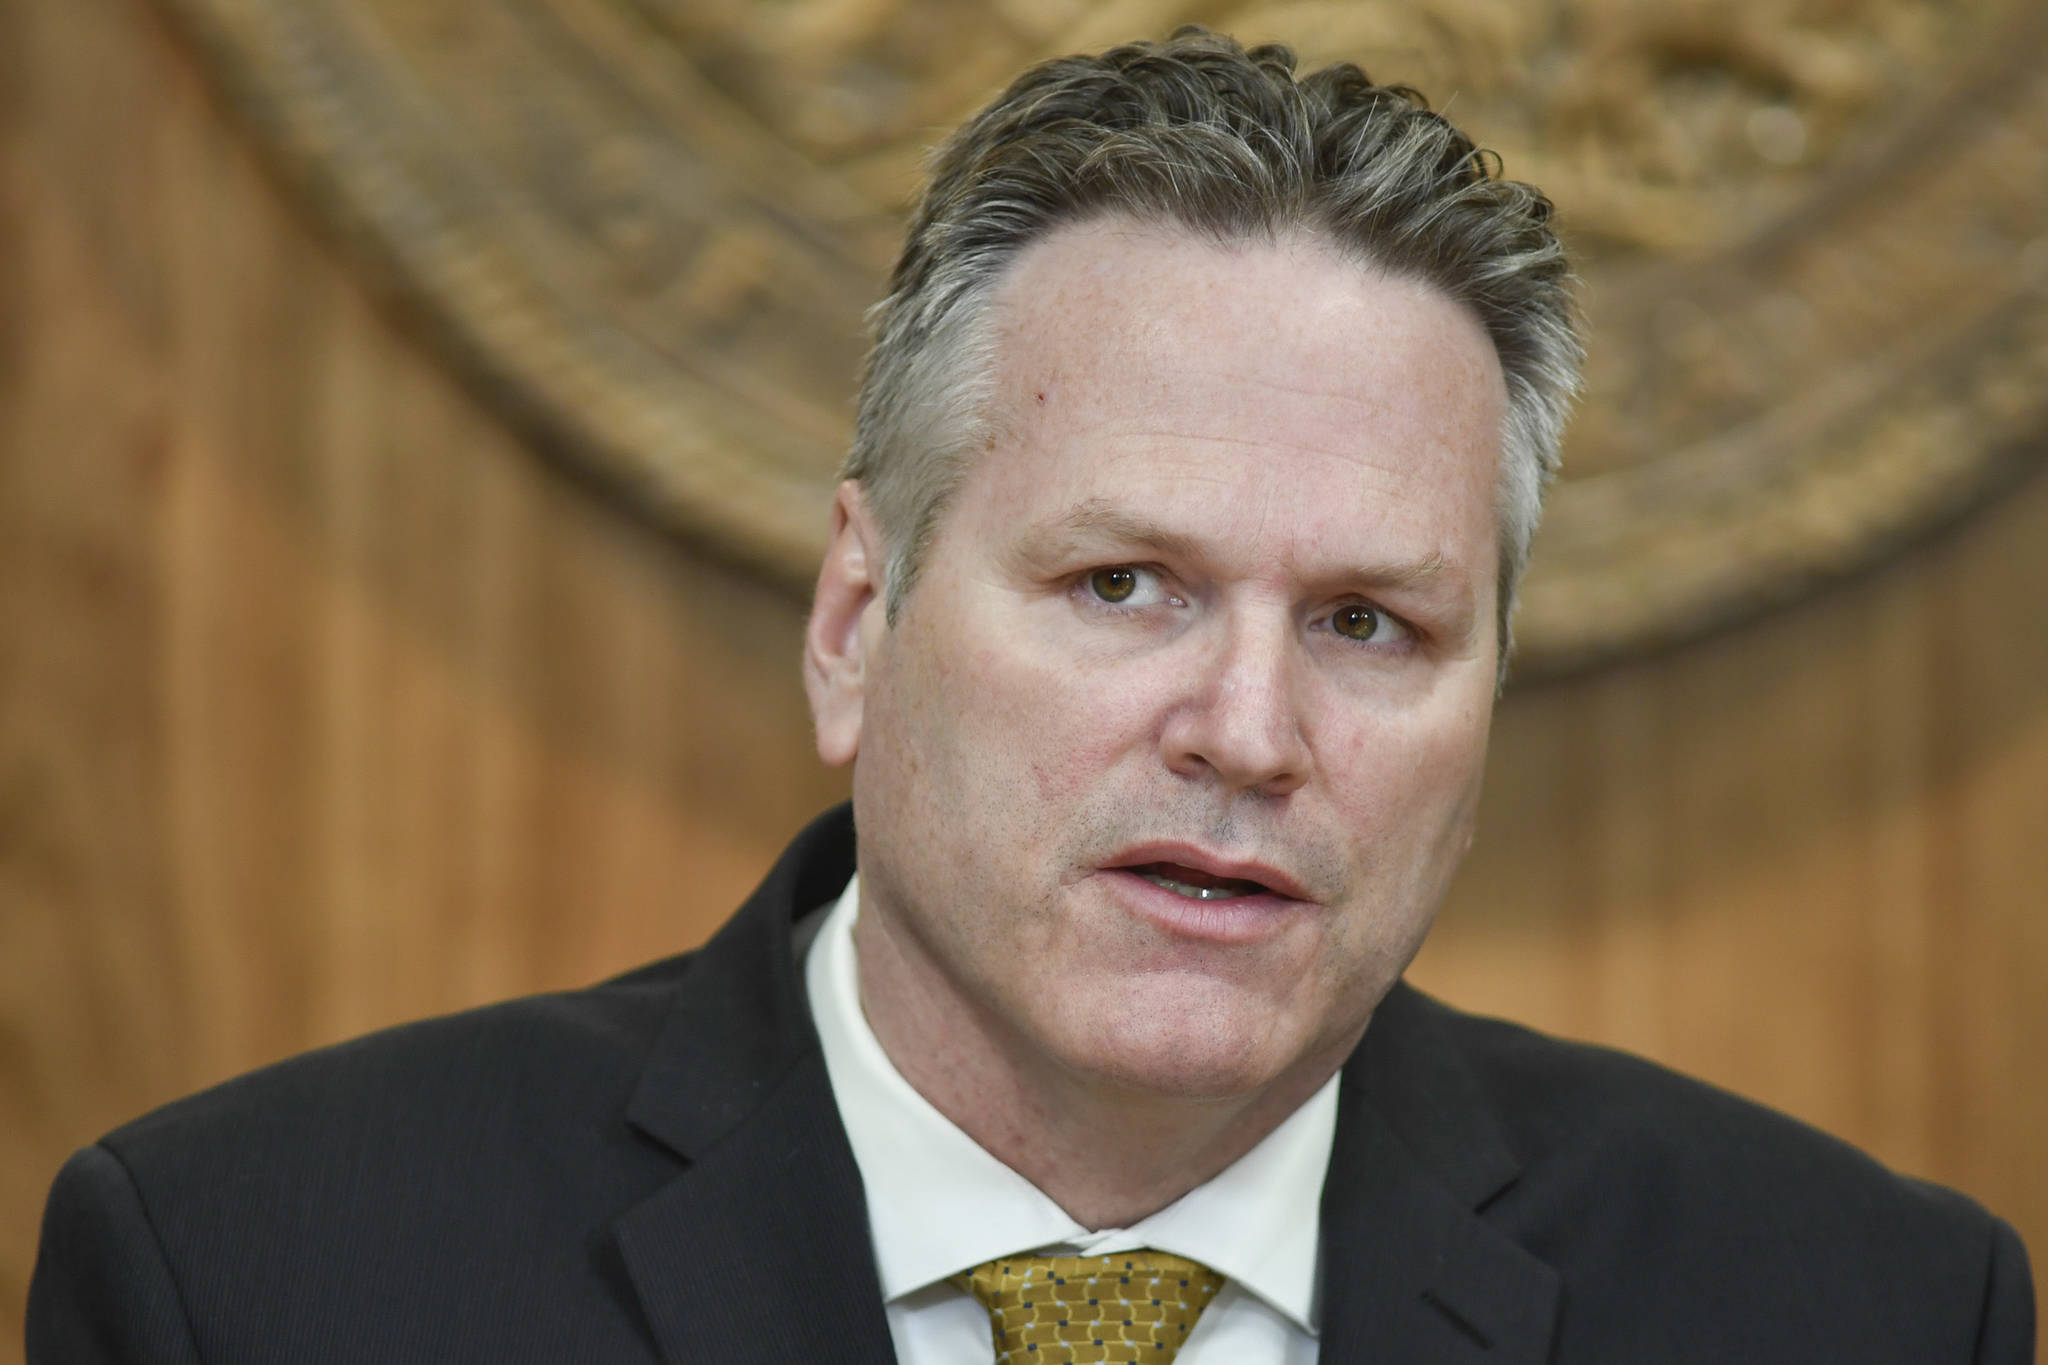 Gov. Mike Dunleavy speaks during a press conference at the Capitol on April 9, 2019. (Michael Penn | Juneau Empire File)